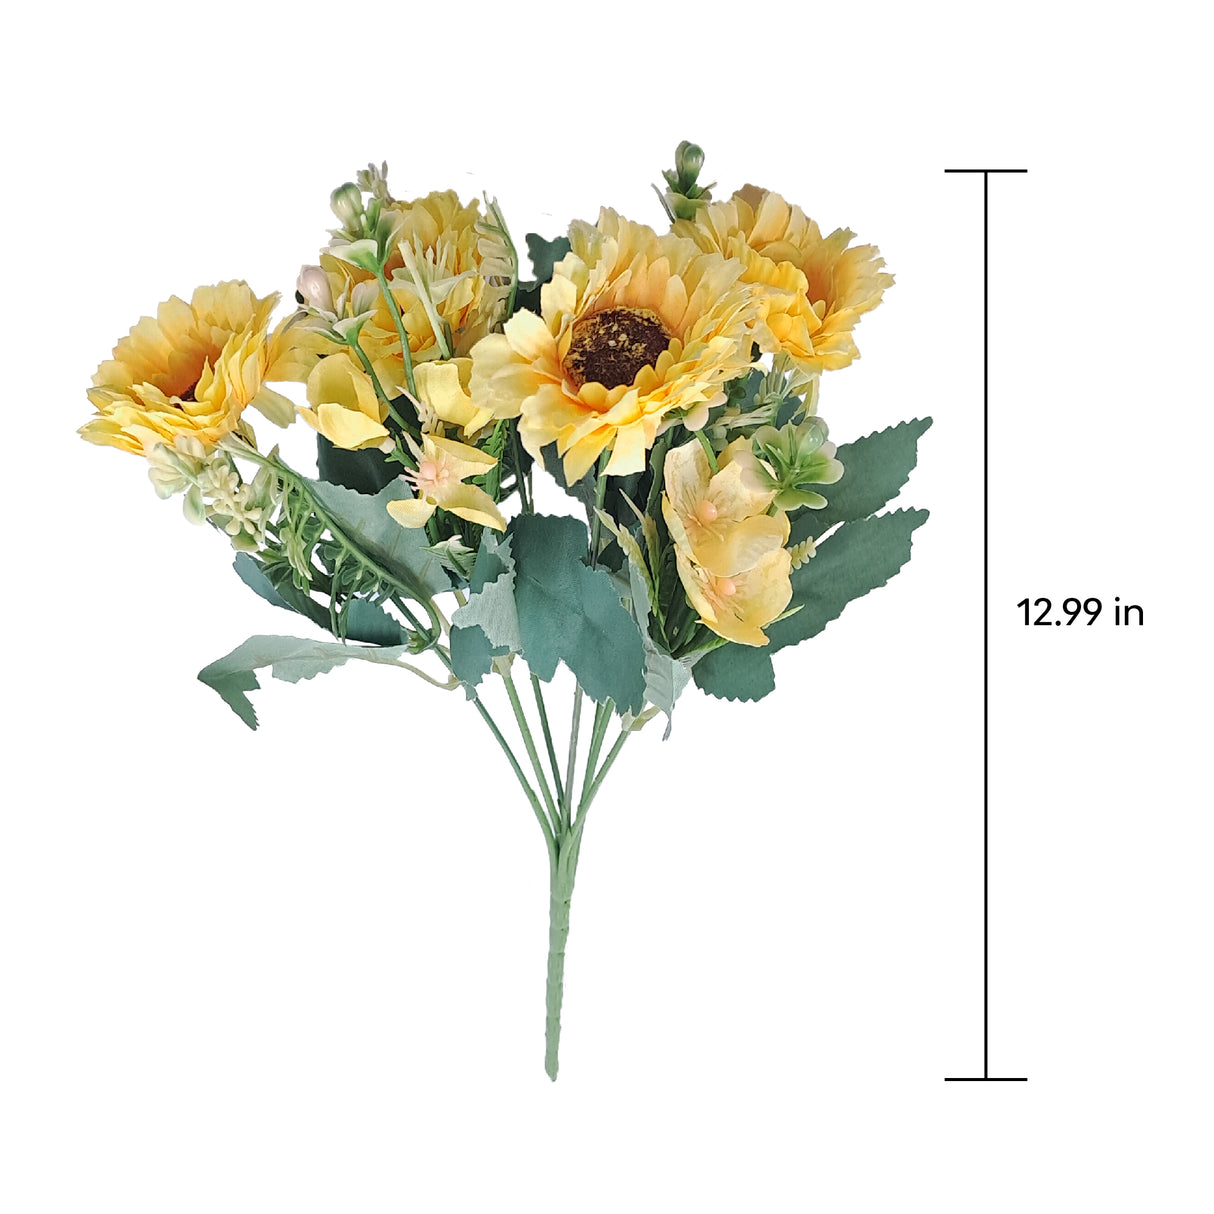 Compact yellow gereras and fern artificial flowers 